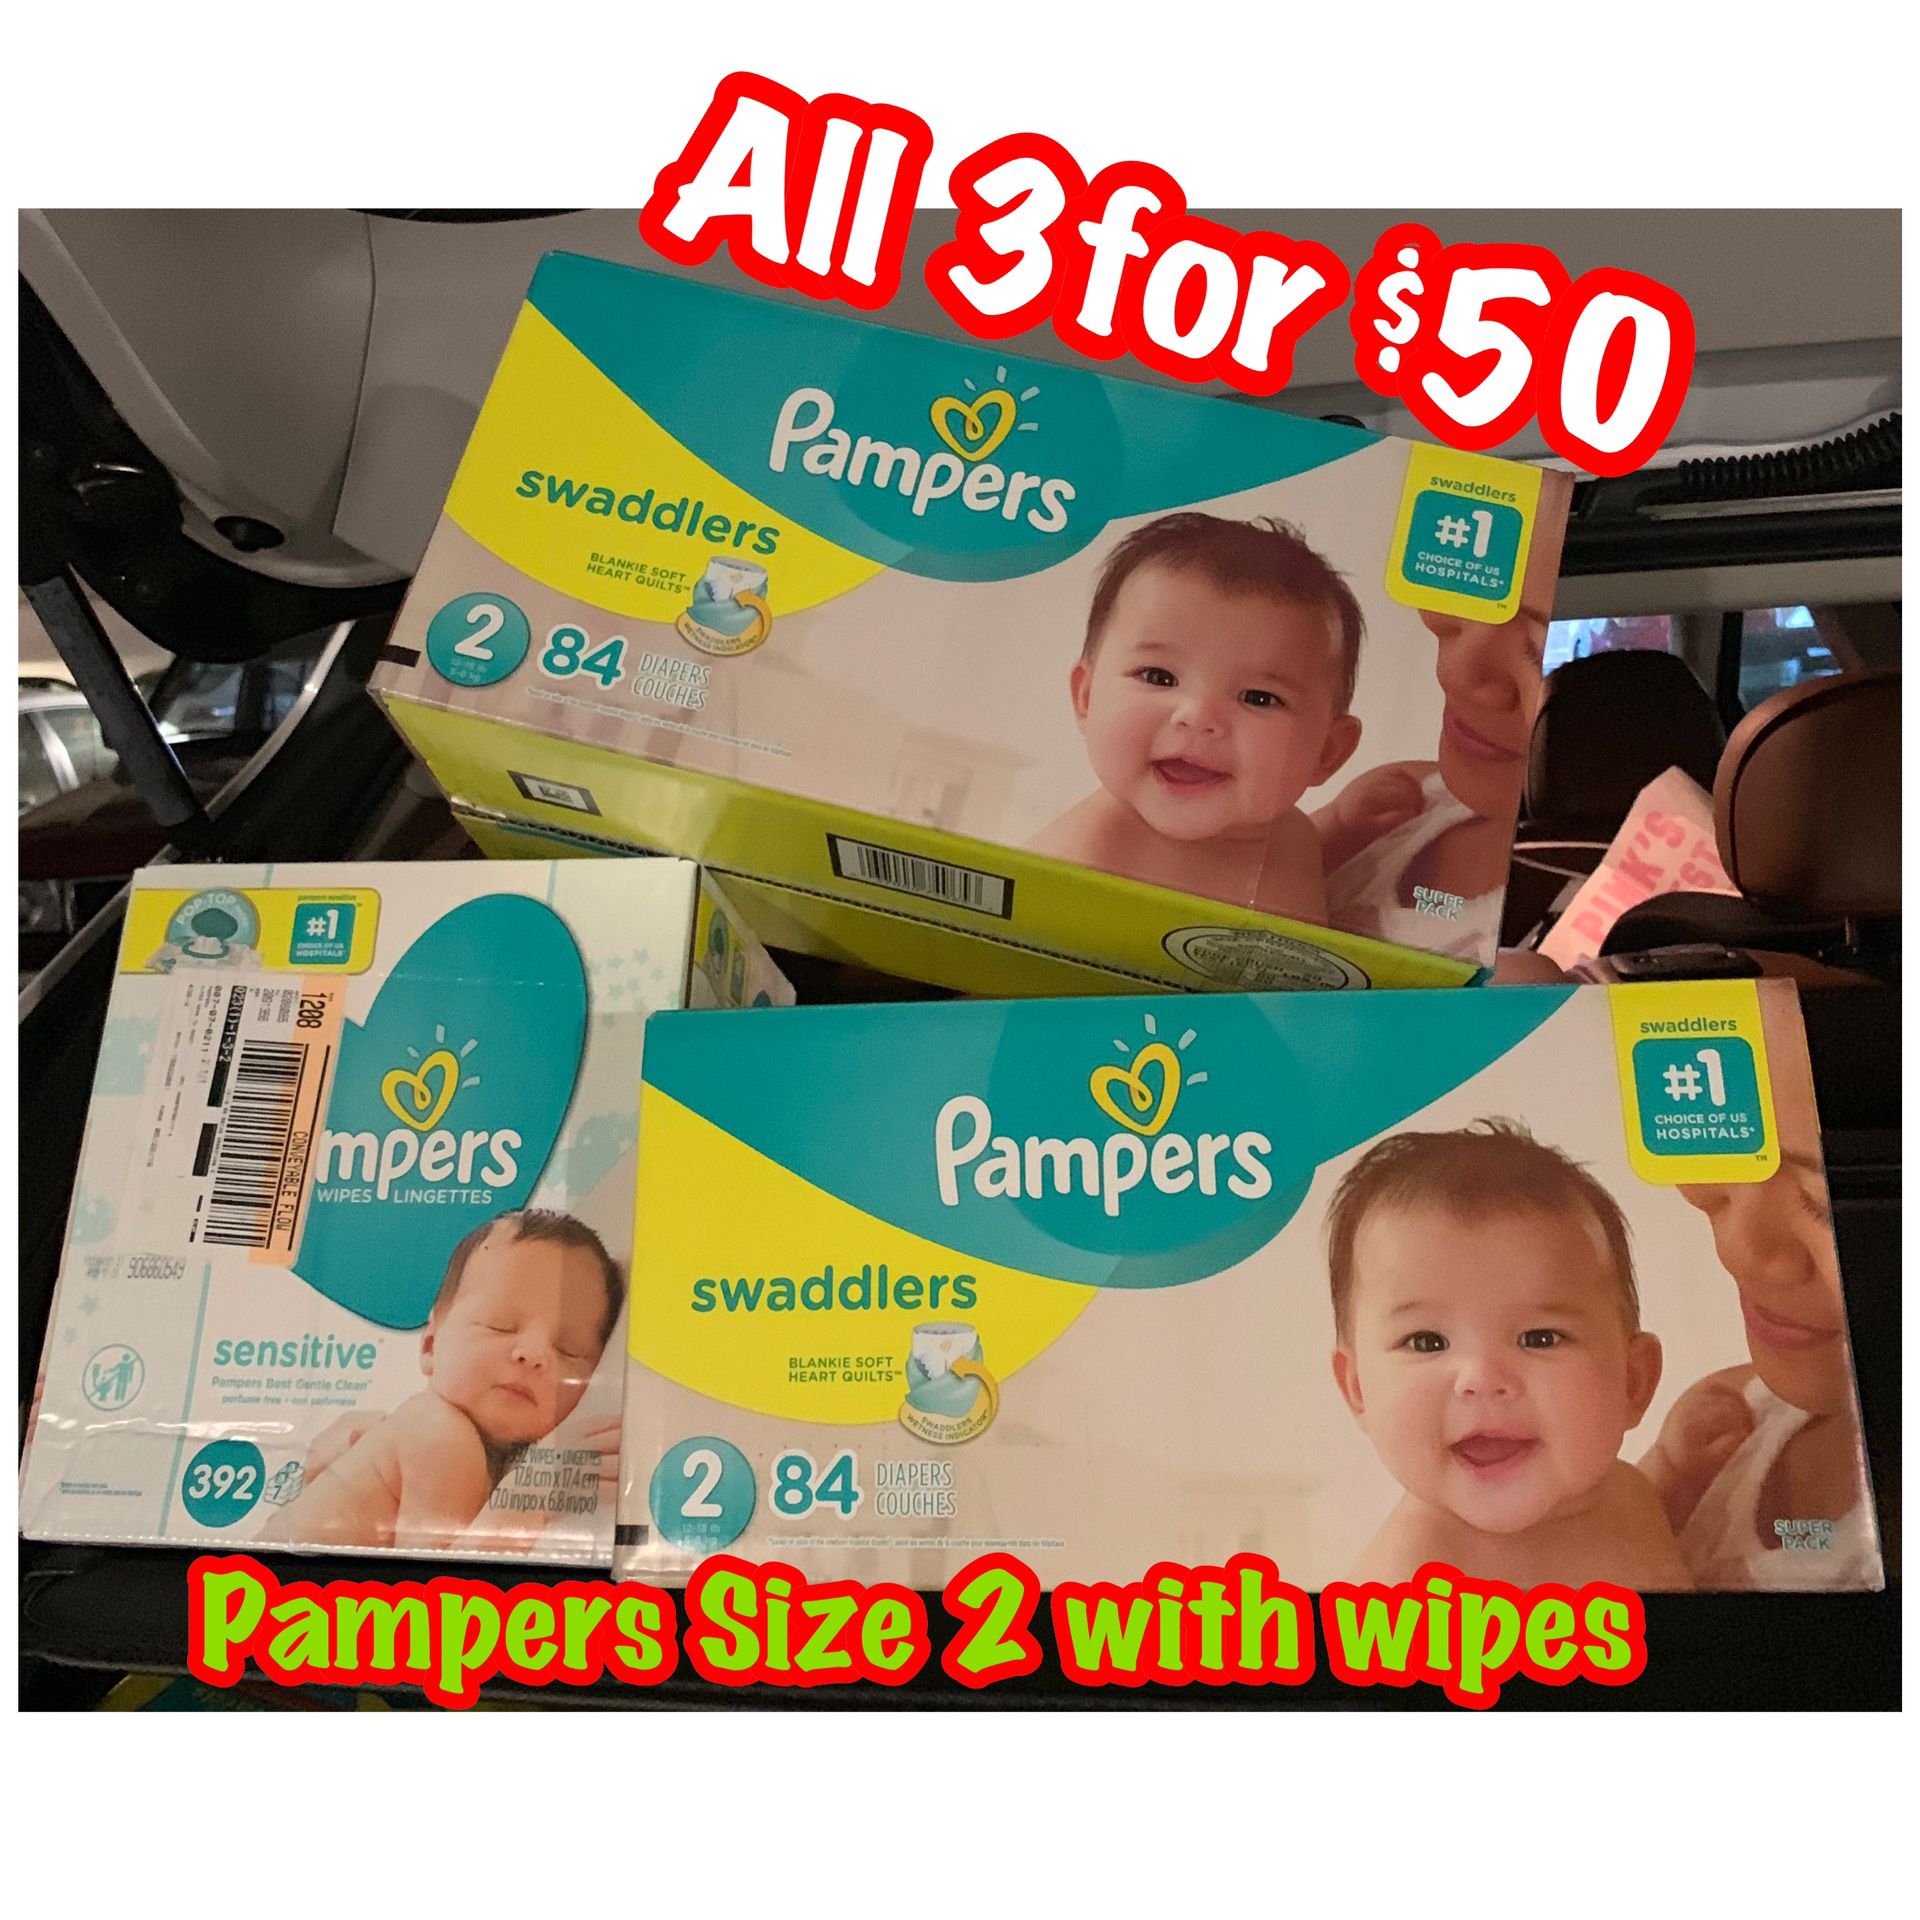 Pampers Size 2 diapers with wipes bundle